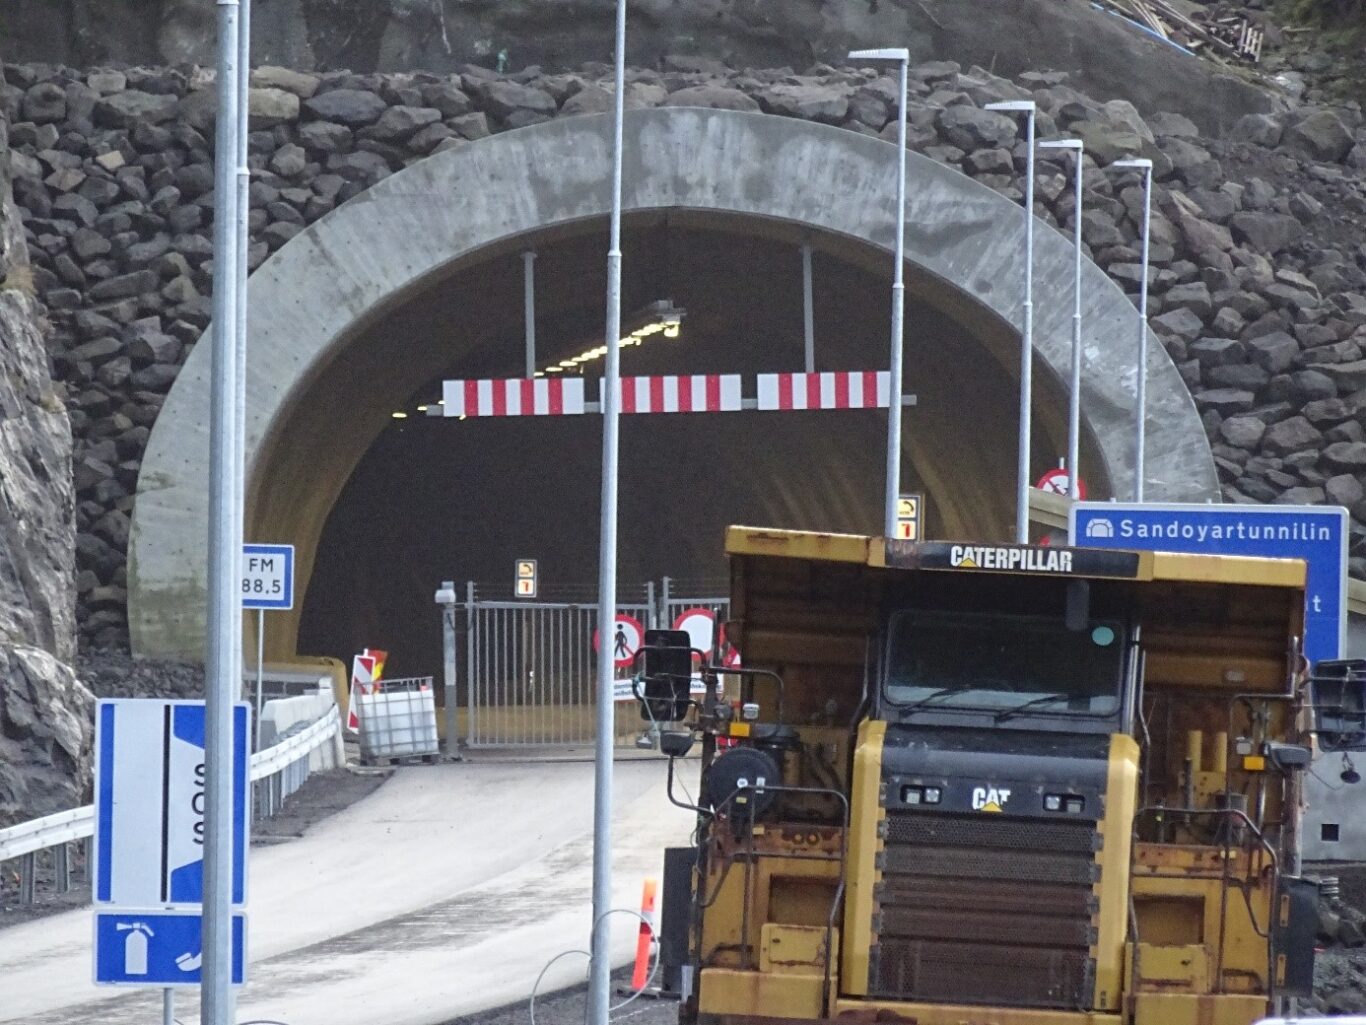 The north access to the Sandoy subsea tunnel in Gamlærett two months before its inauguration. Photo by Alexis Sancho-Reinoso.